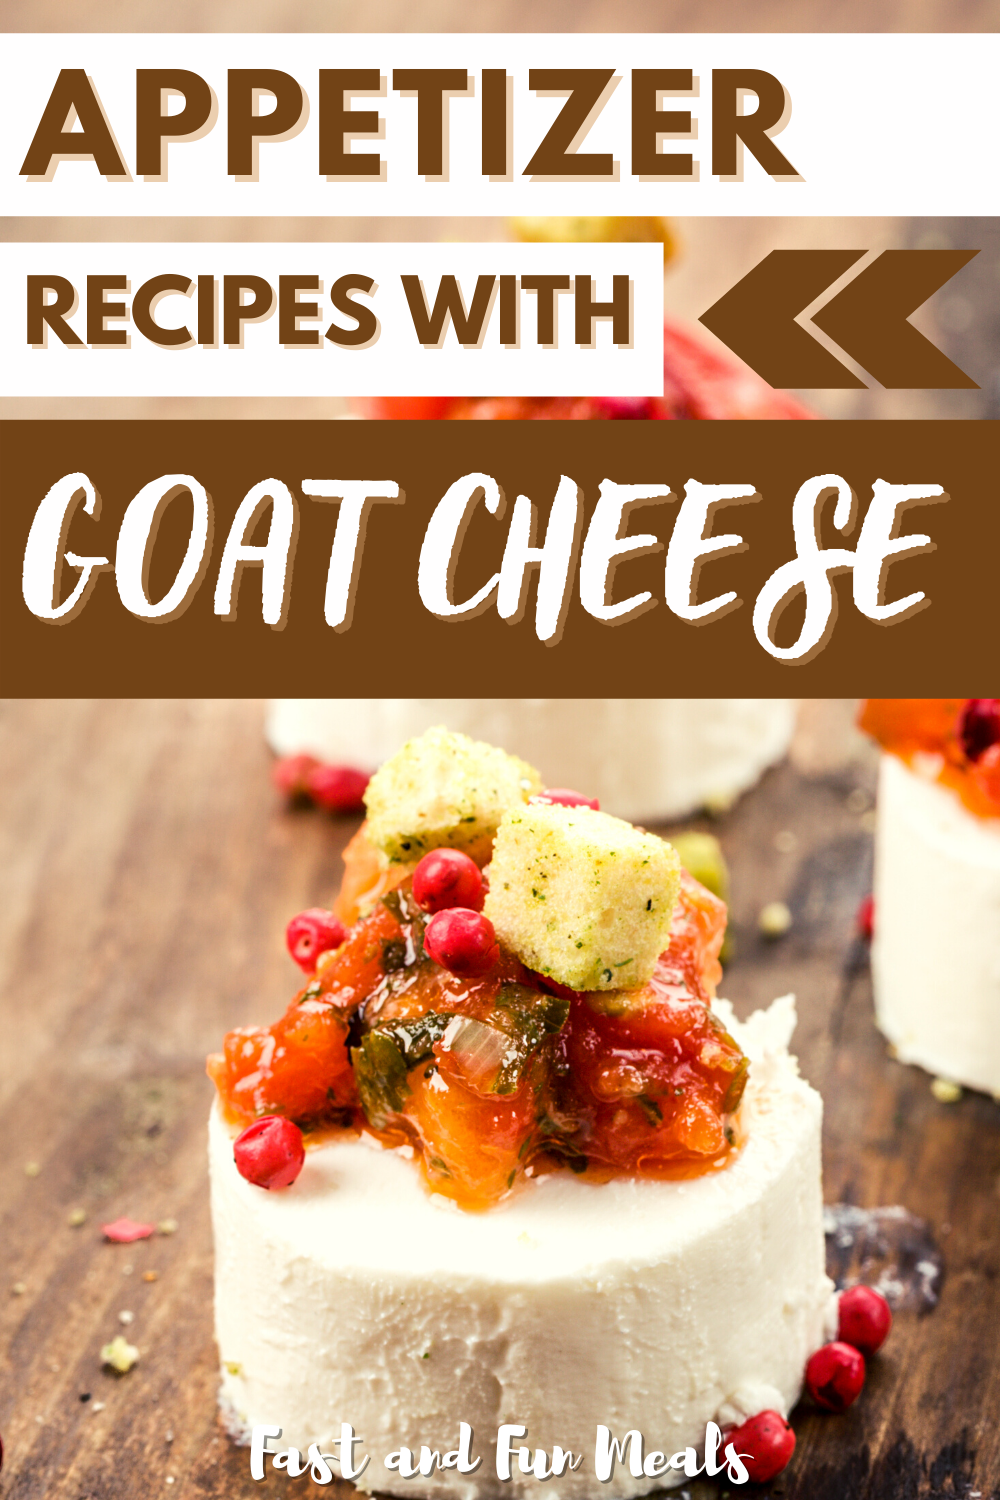 Pin showing Appetizers with Goat Cheese